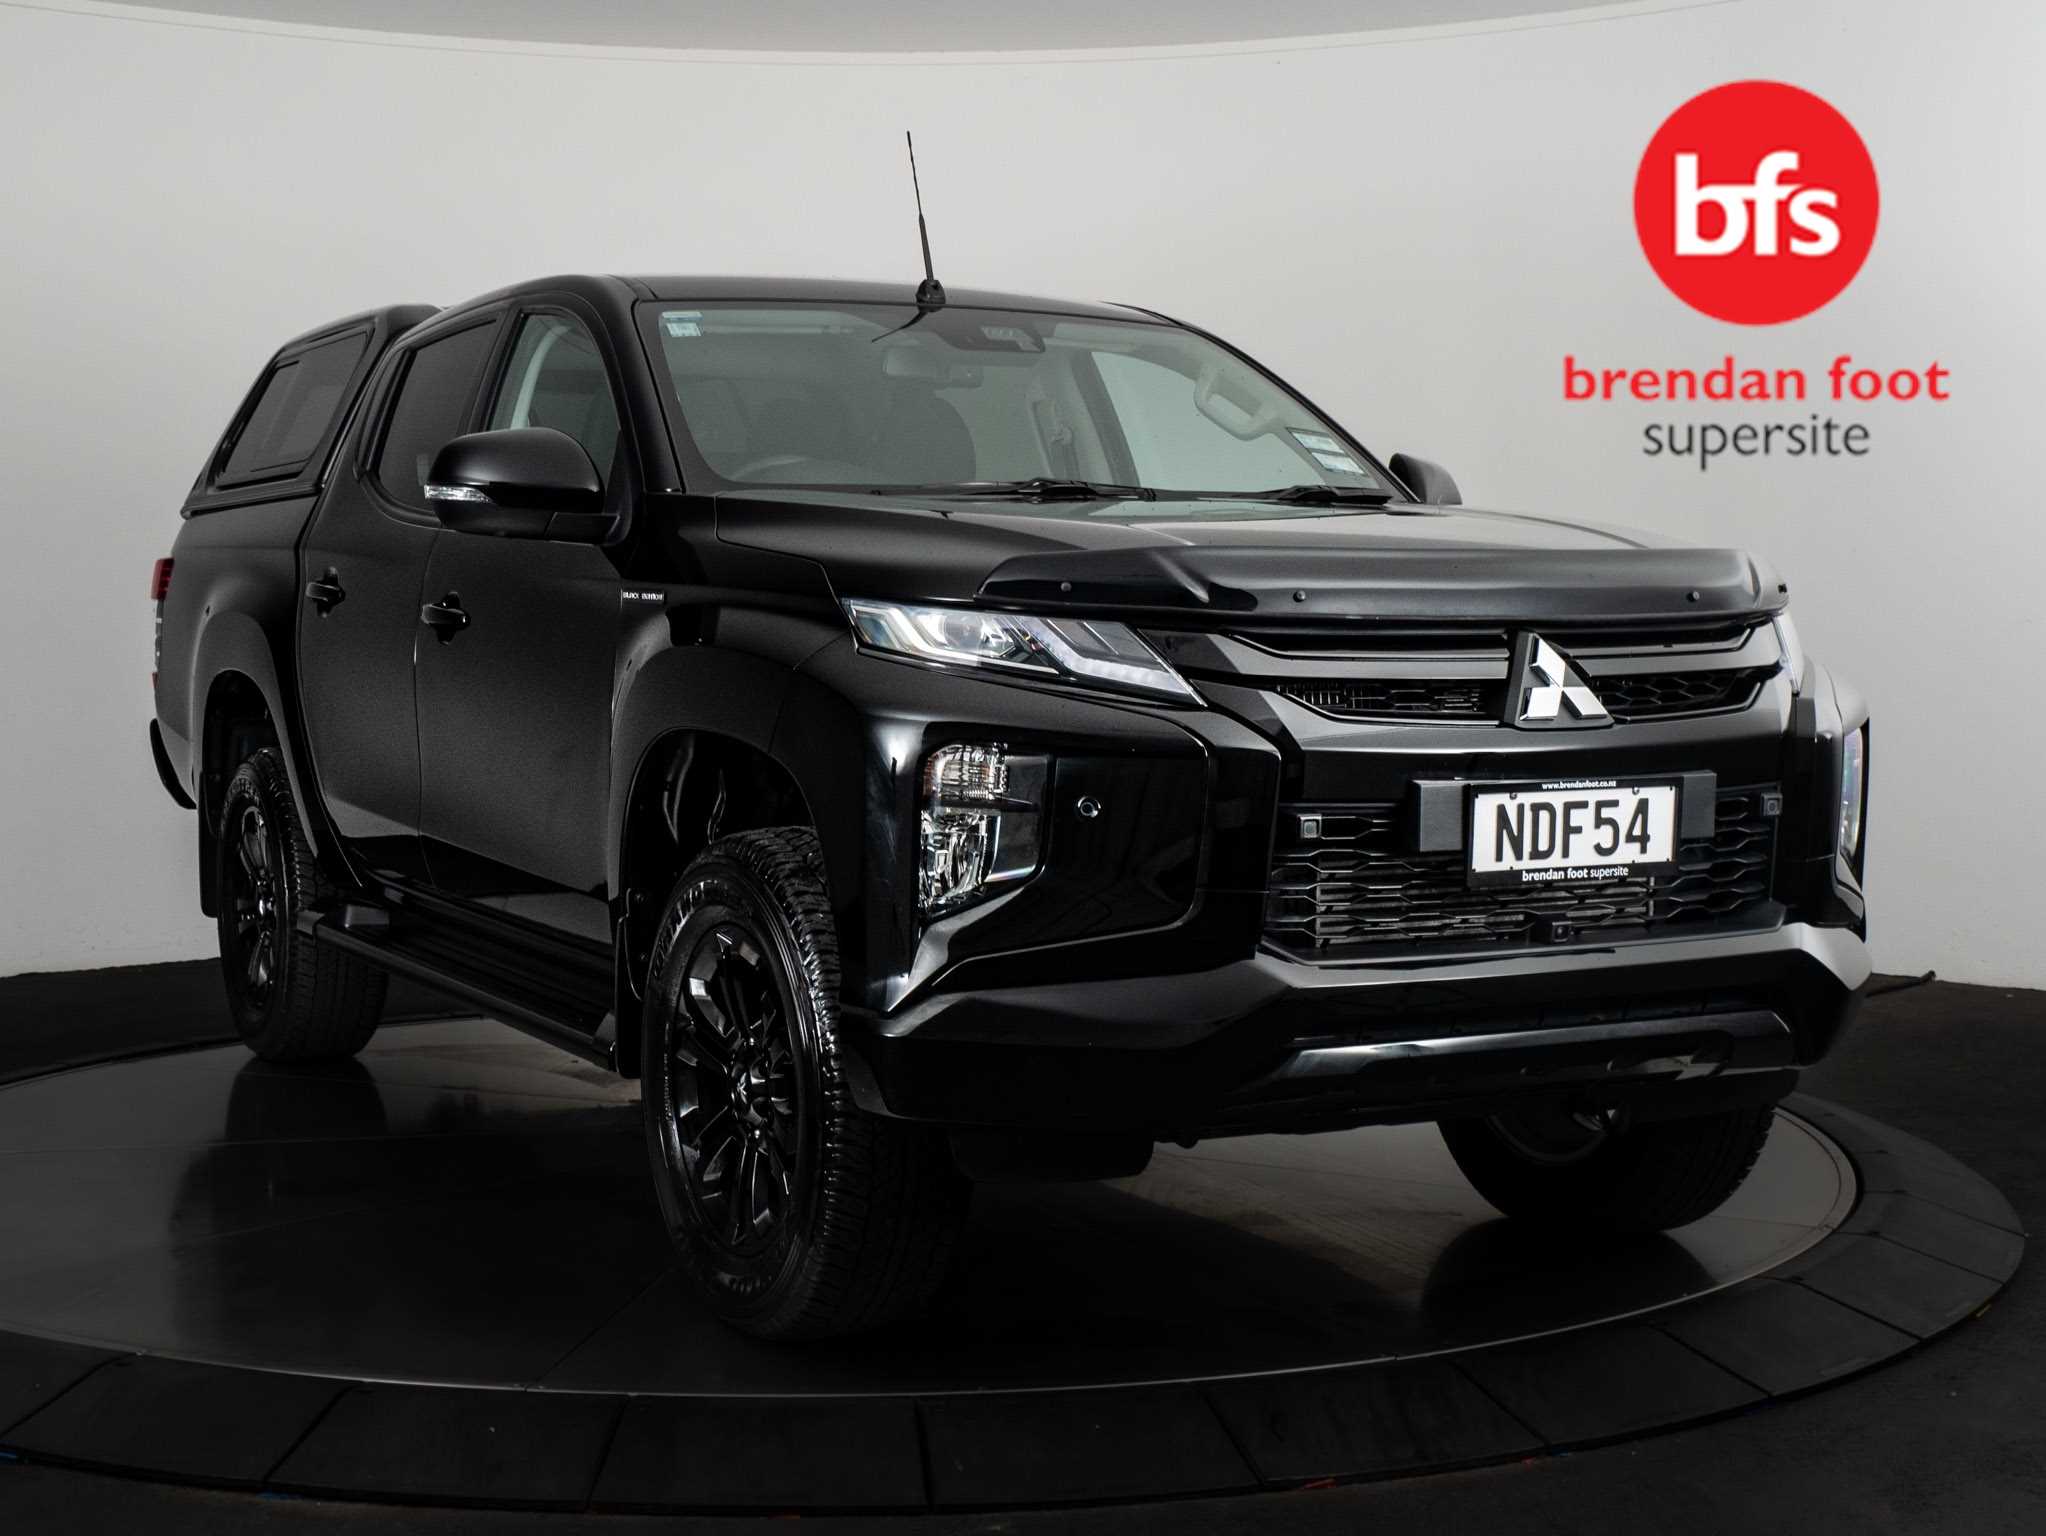 Motors Cars & Parts Cars : 2020 Mitsubishi Triton 4WD Auto GLS Black Edition Low kms with nice extras. As new!